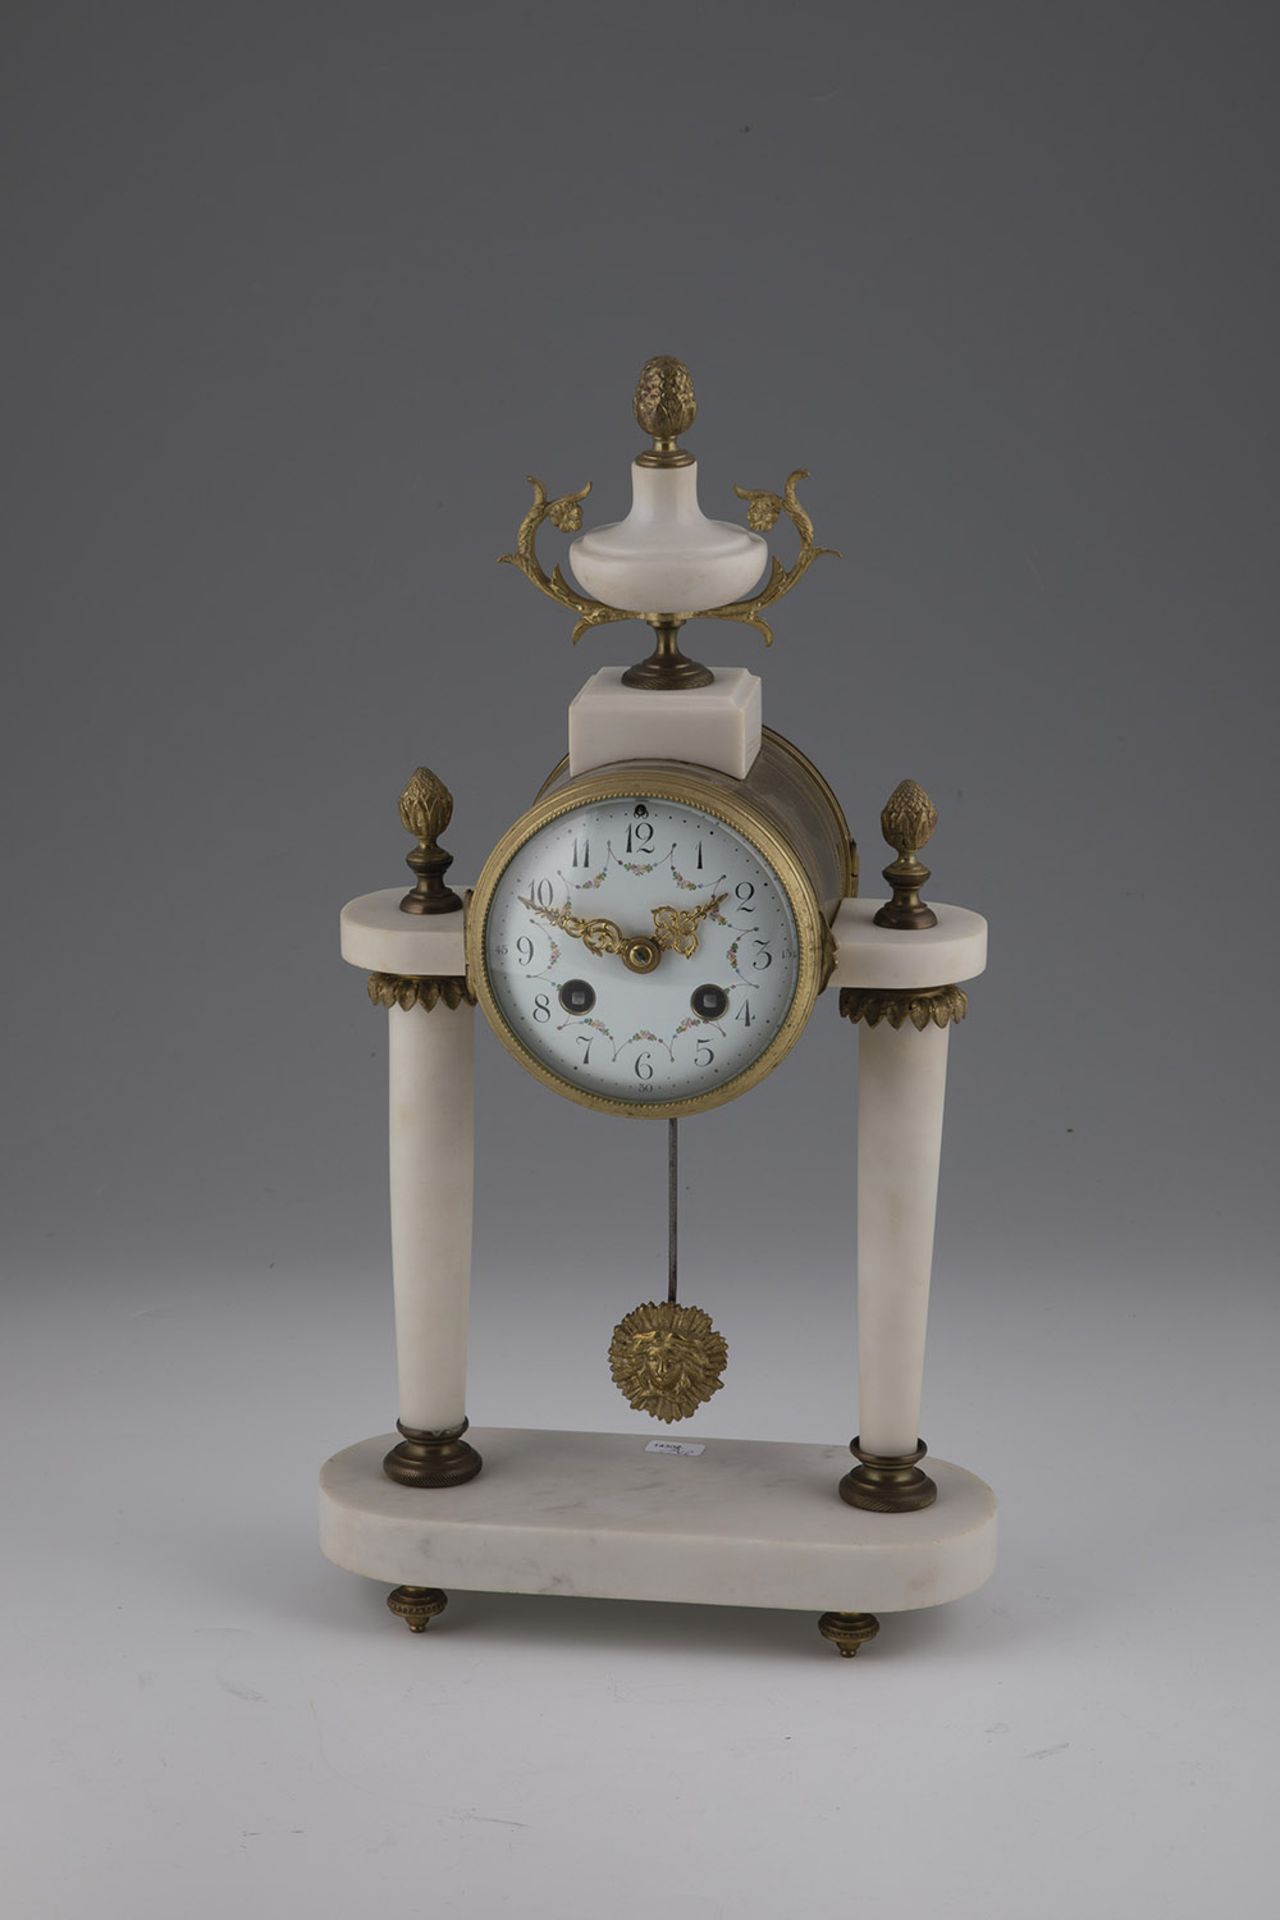 Mantel clock with two side instruments - Image 2 of 2